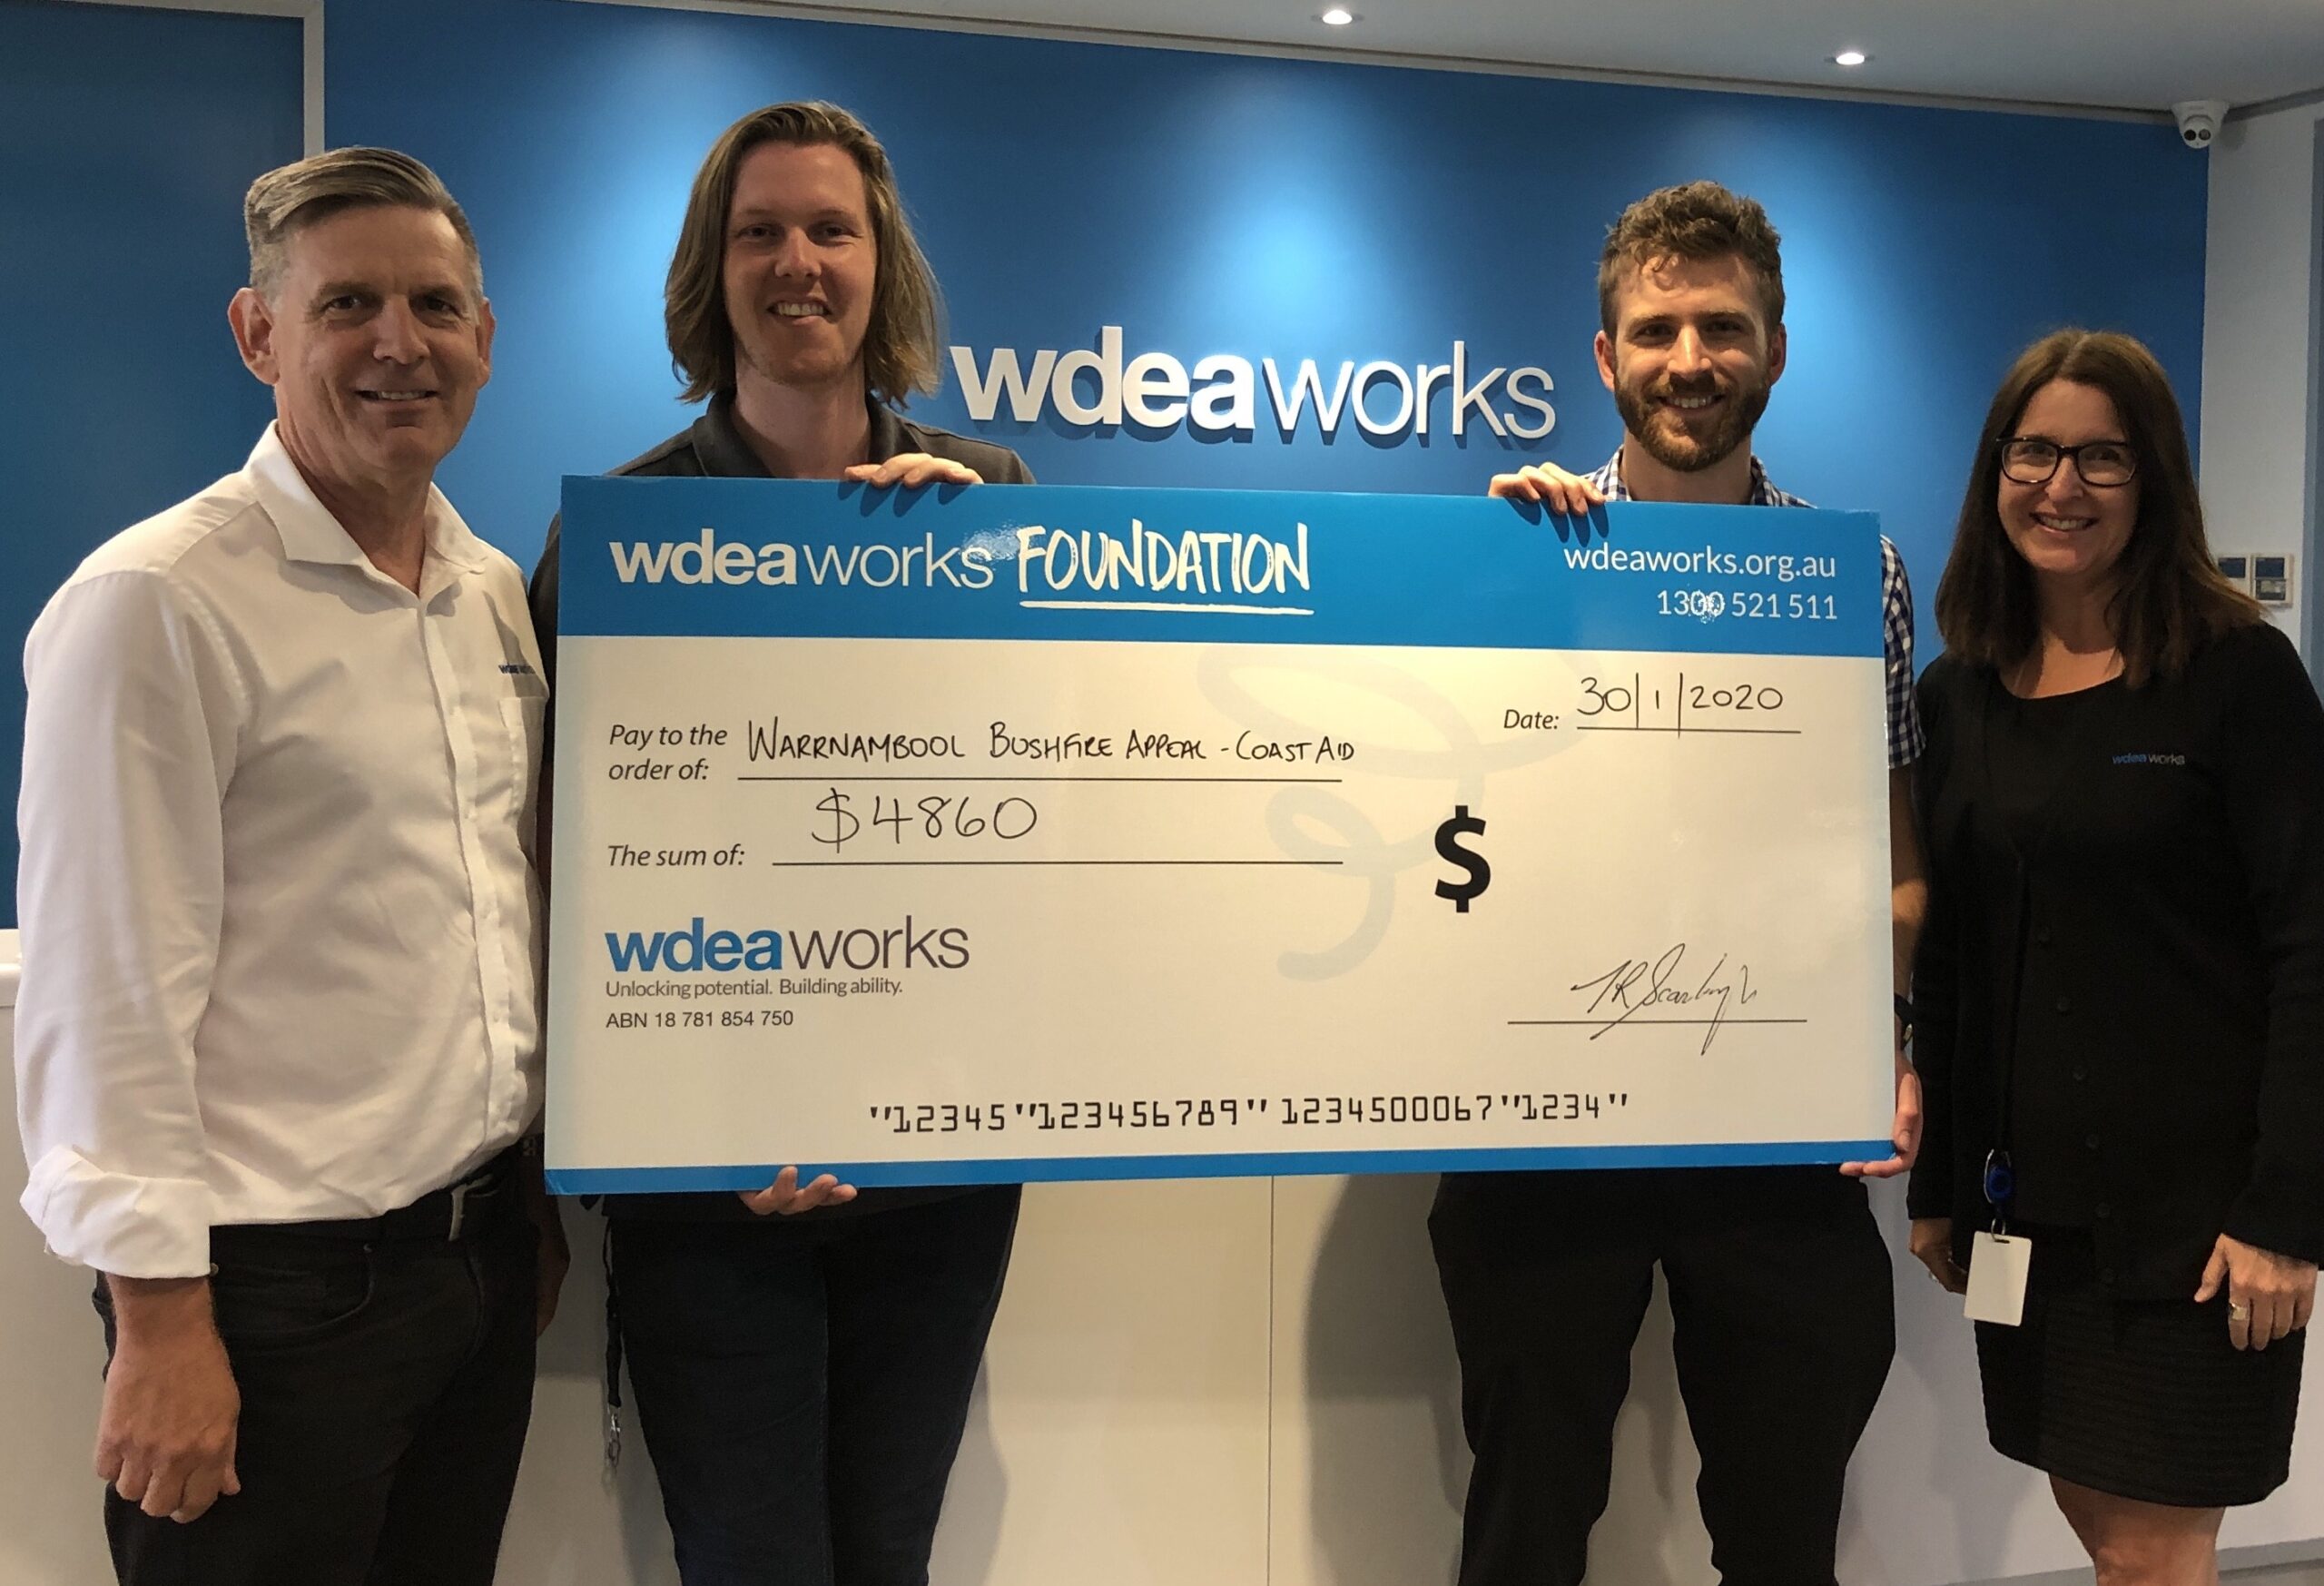 WDEA Works presents a cheque to Coast Aid event organisers. L-R WDEA Works CEO Tom Scarborough, Coast Aid's Garry Roberts & Tom O'Connor and WDEA Works Director of Communications & Engagement Andrea Hogan